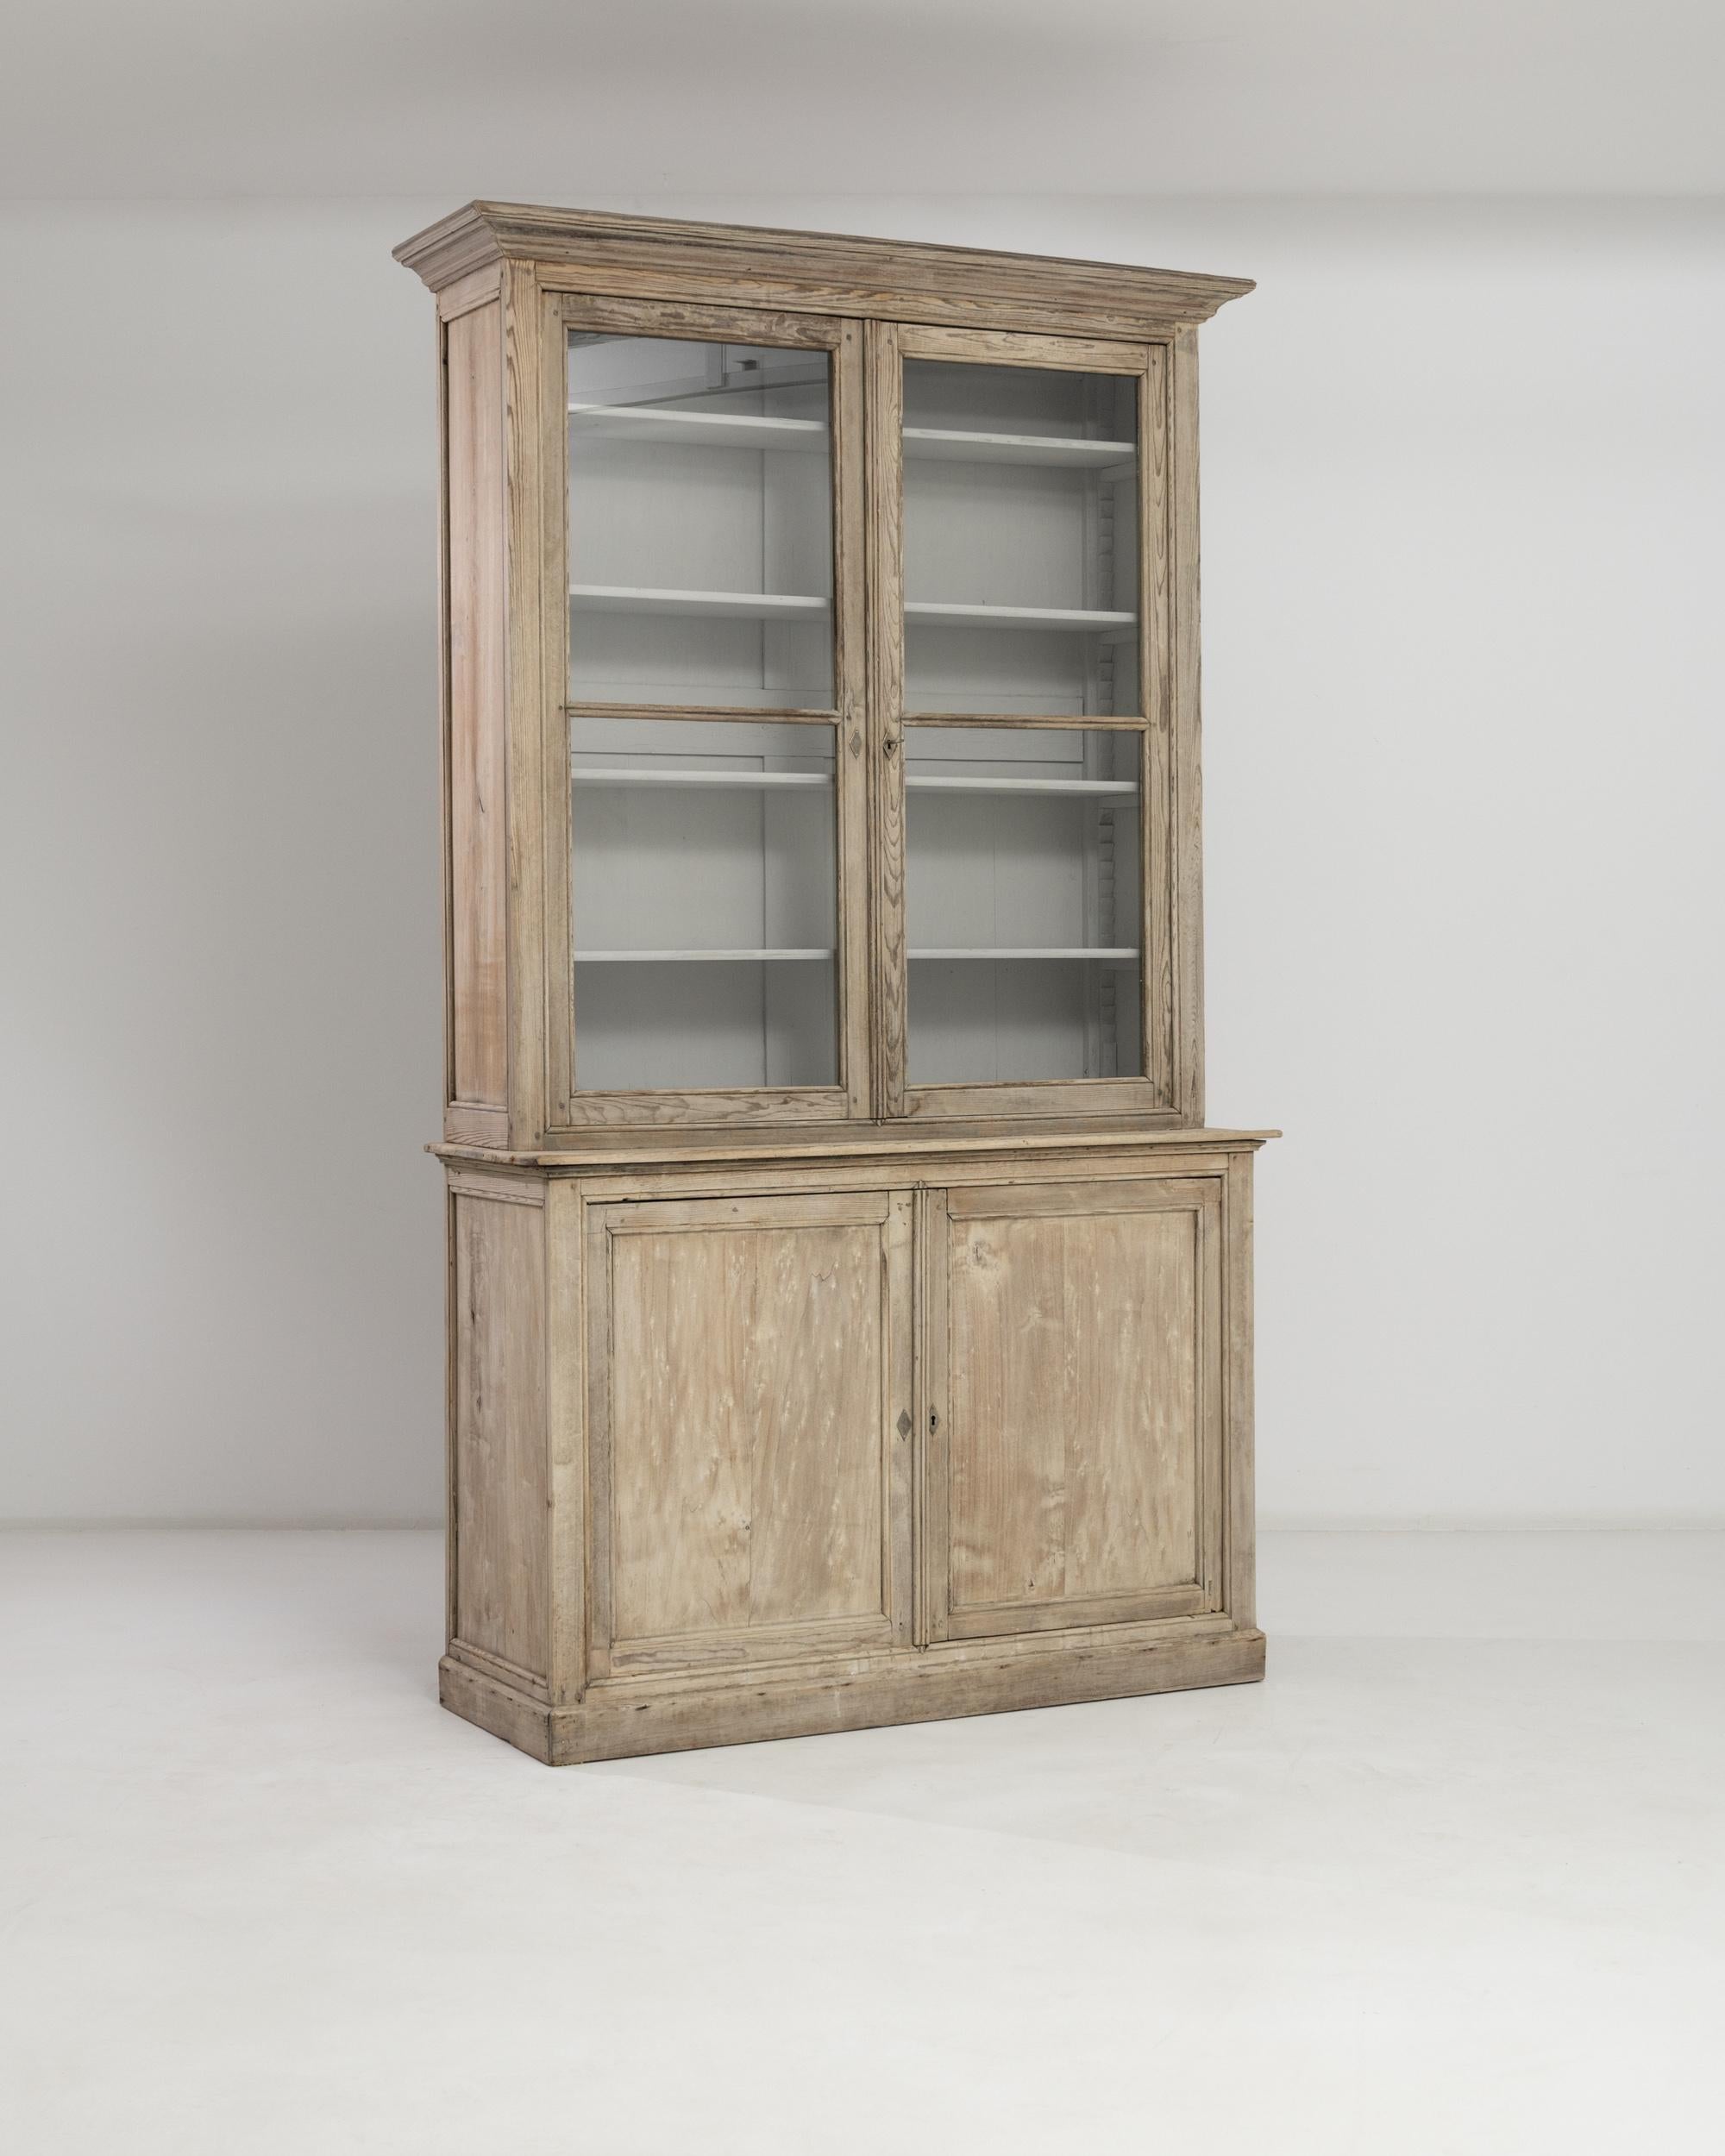 With its ample display cabinet and spacious lower compartments, this 20th century French vitrine à deux corps offers a plethora of storage. A sharp-cornered cornice together with a carved molding elegantly frame the upper section, while the sturdy